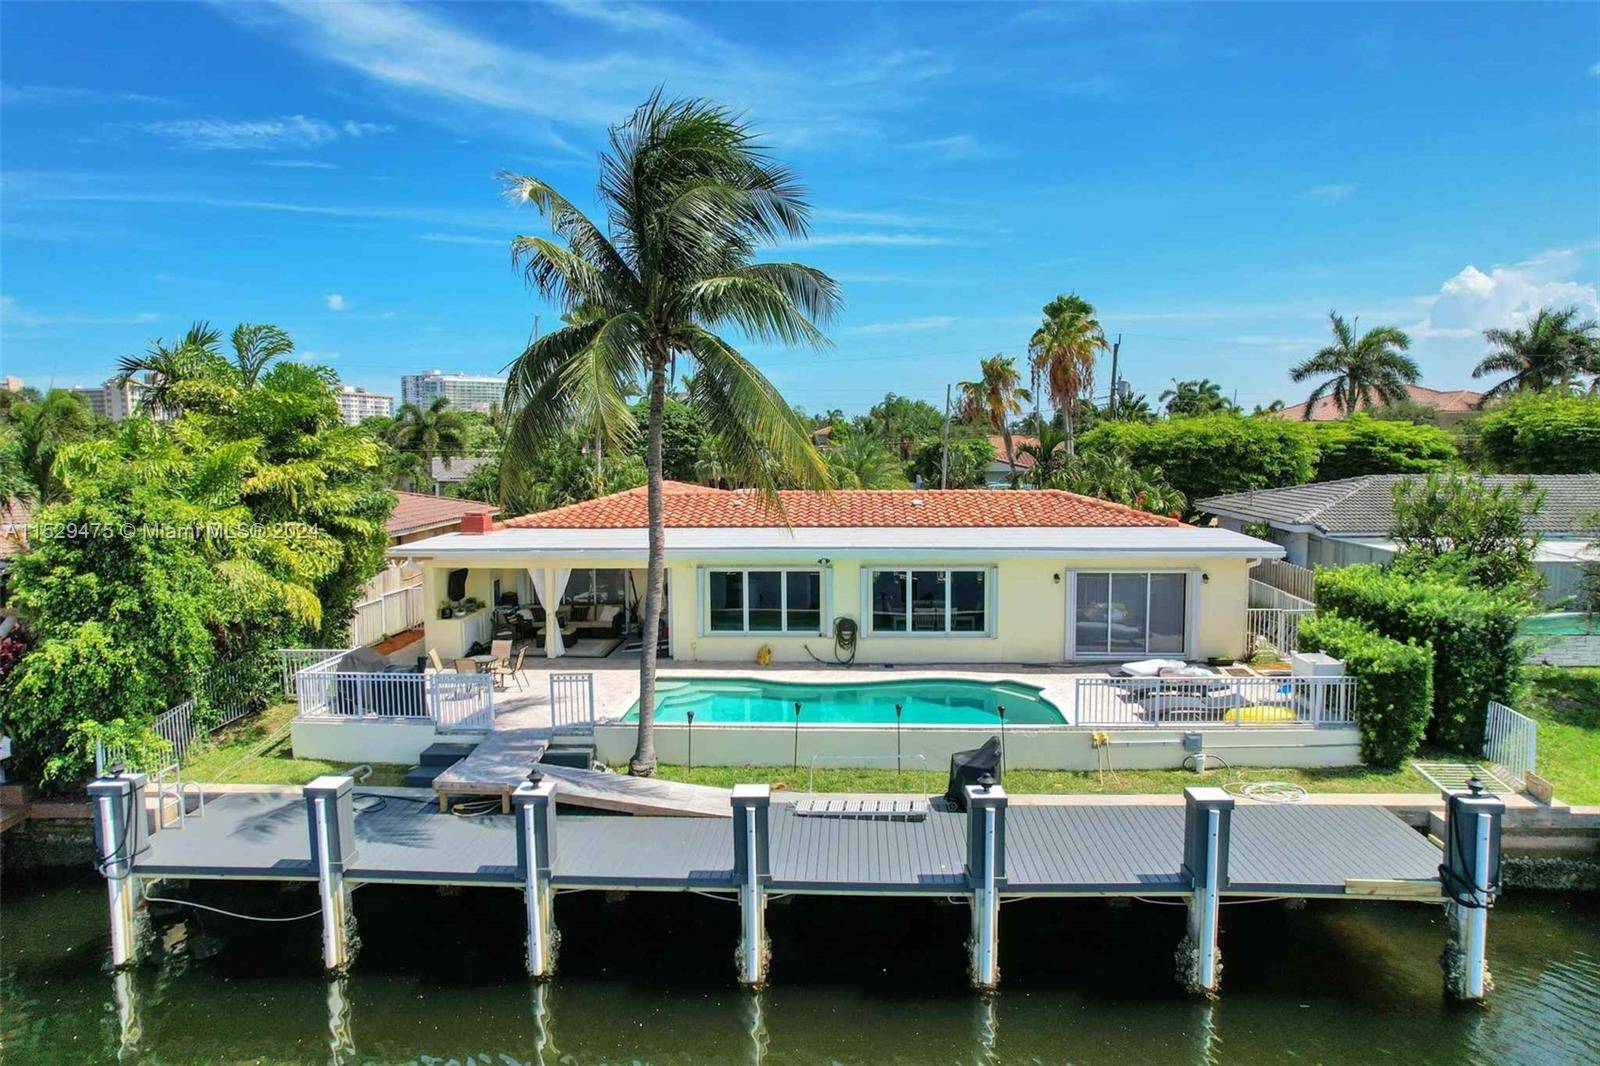 Waterfront home for rent in the sought after Lake Capri Harbor Village area of Pompano Beach.